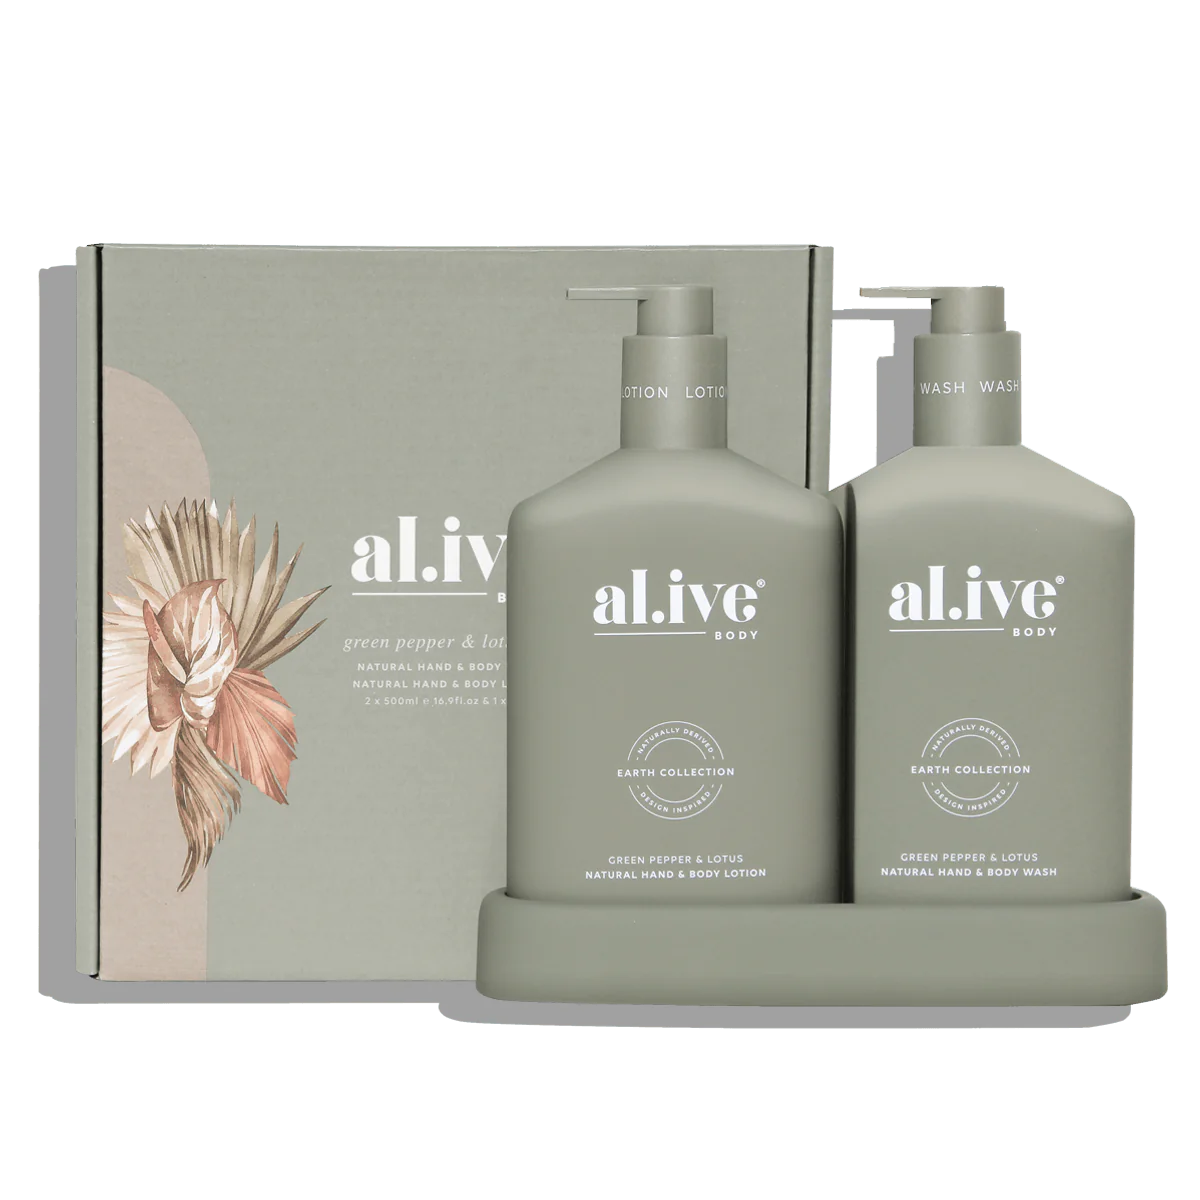 Al.ive Body | Wash & Lotion Duo + Tray - Green Pepper & Lotus